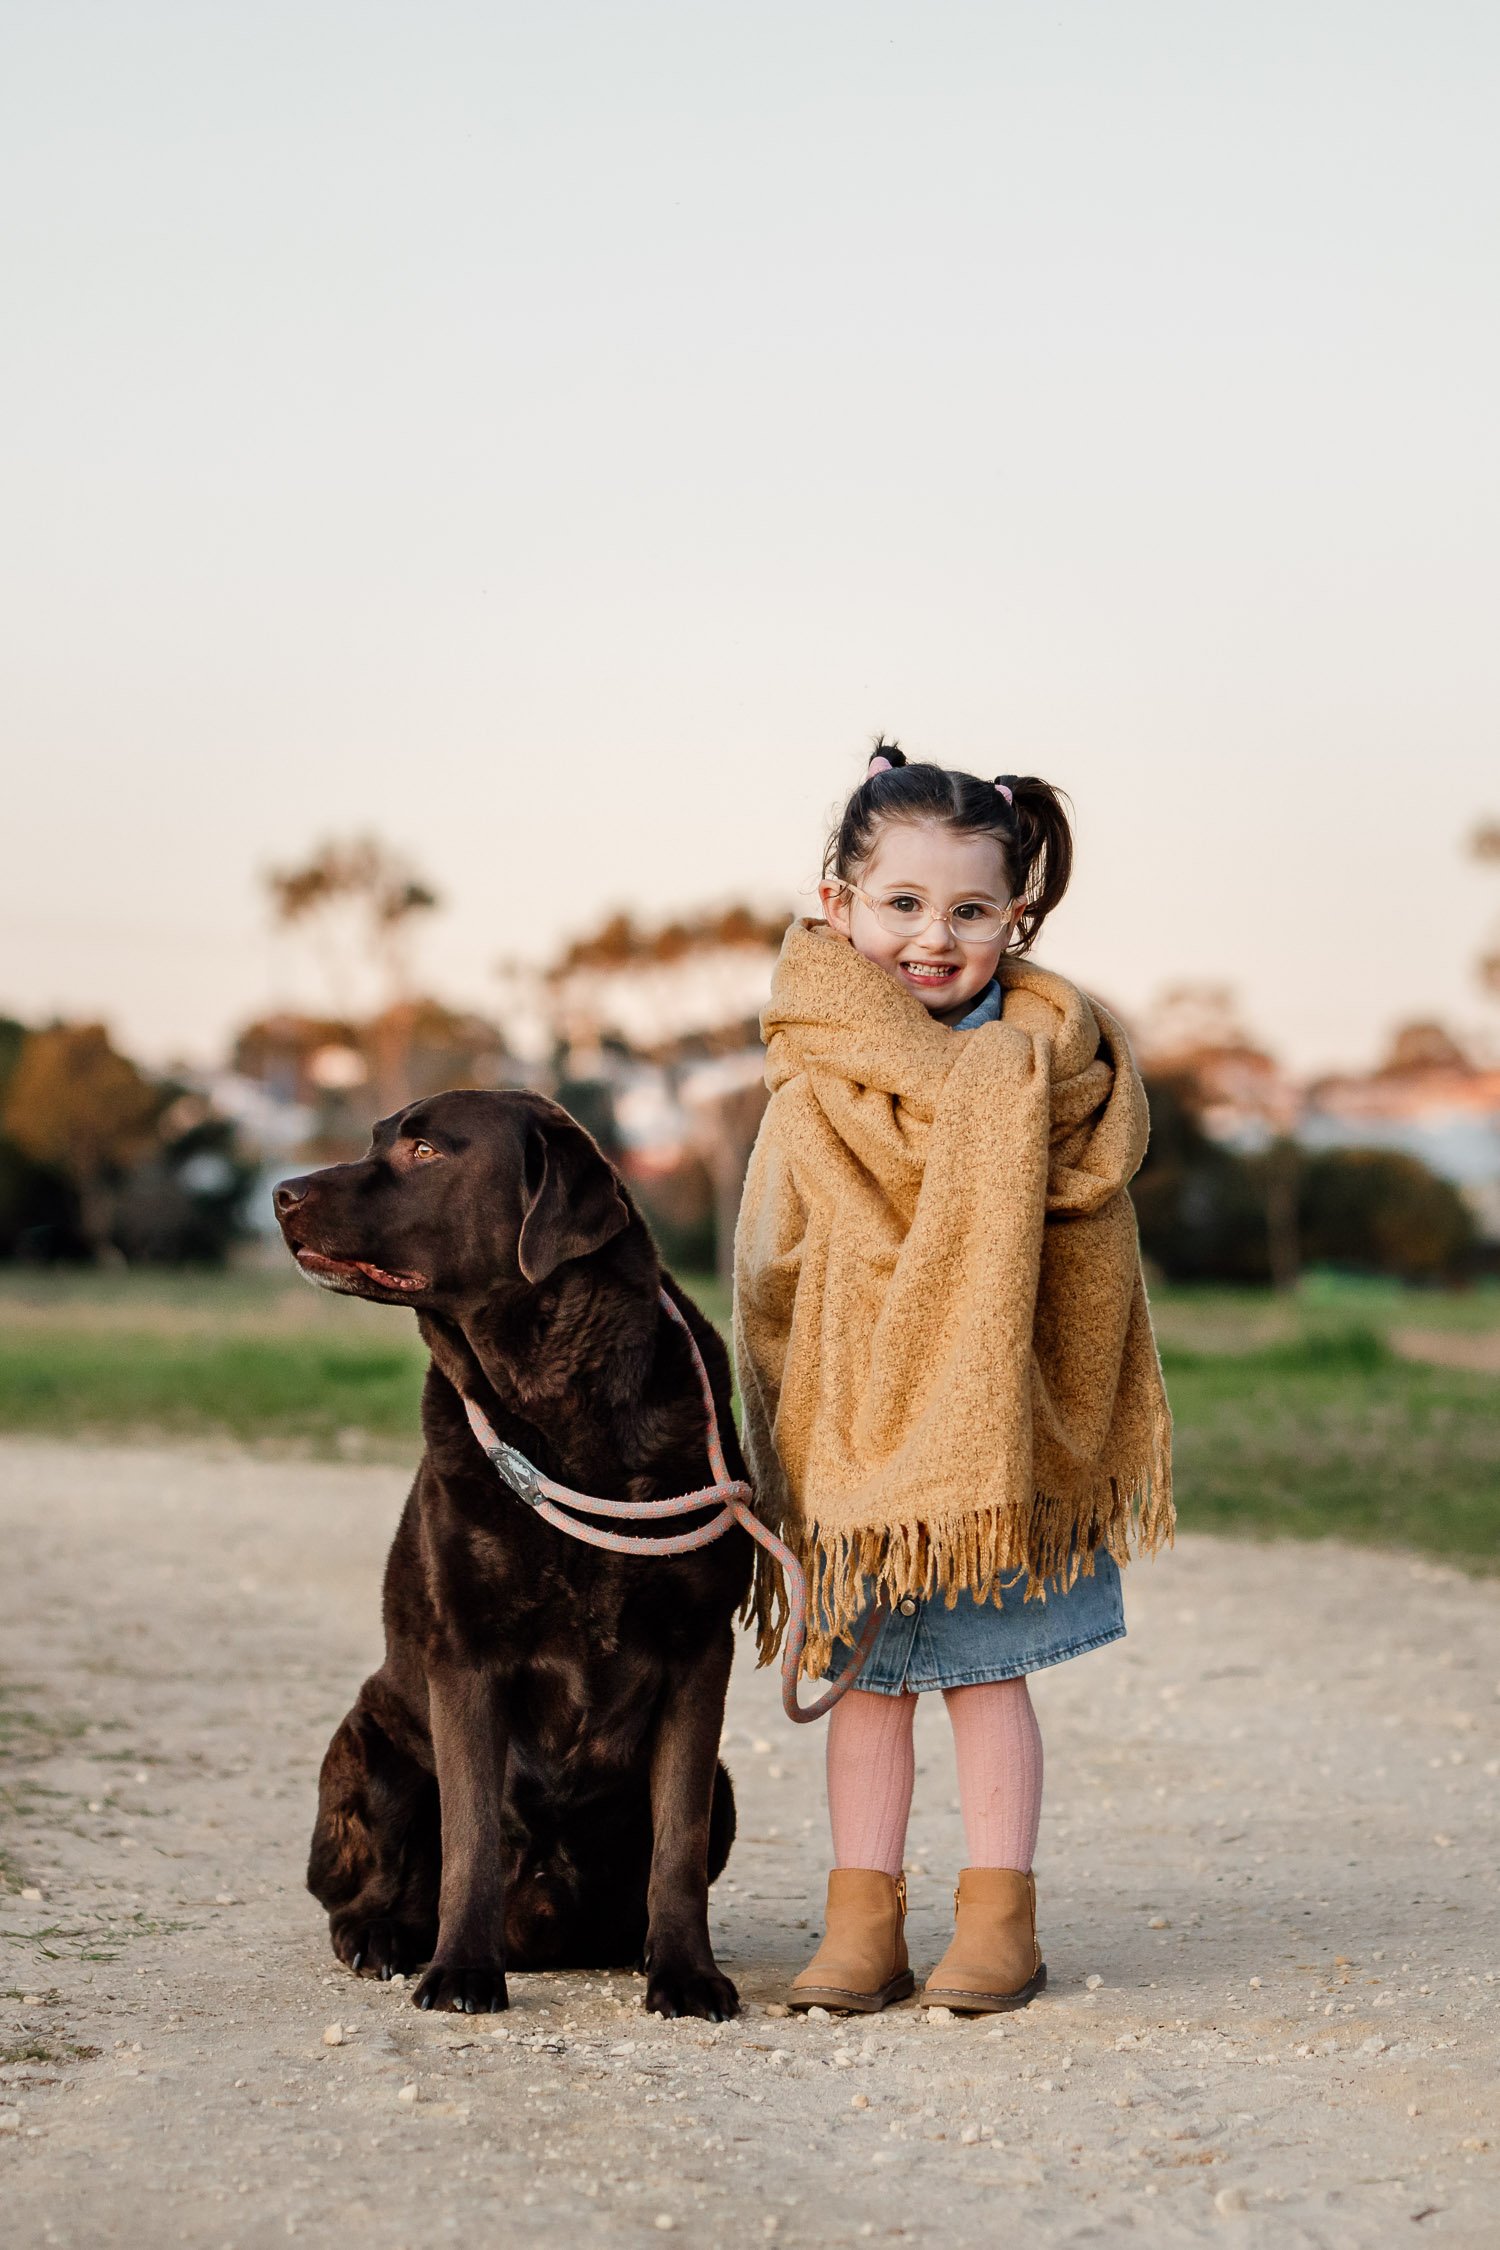 Perth Pet and Dog photographer loves it when the kids want photos with their beloved pet too.